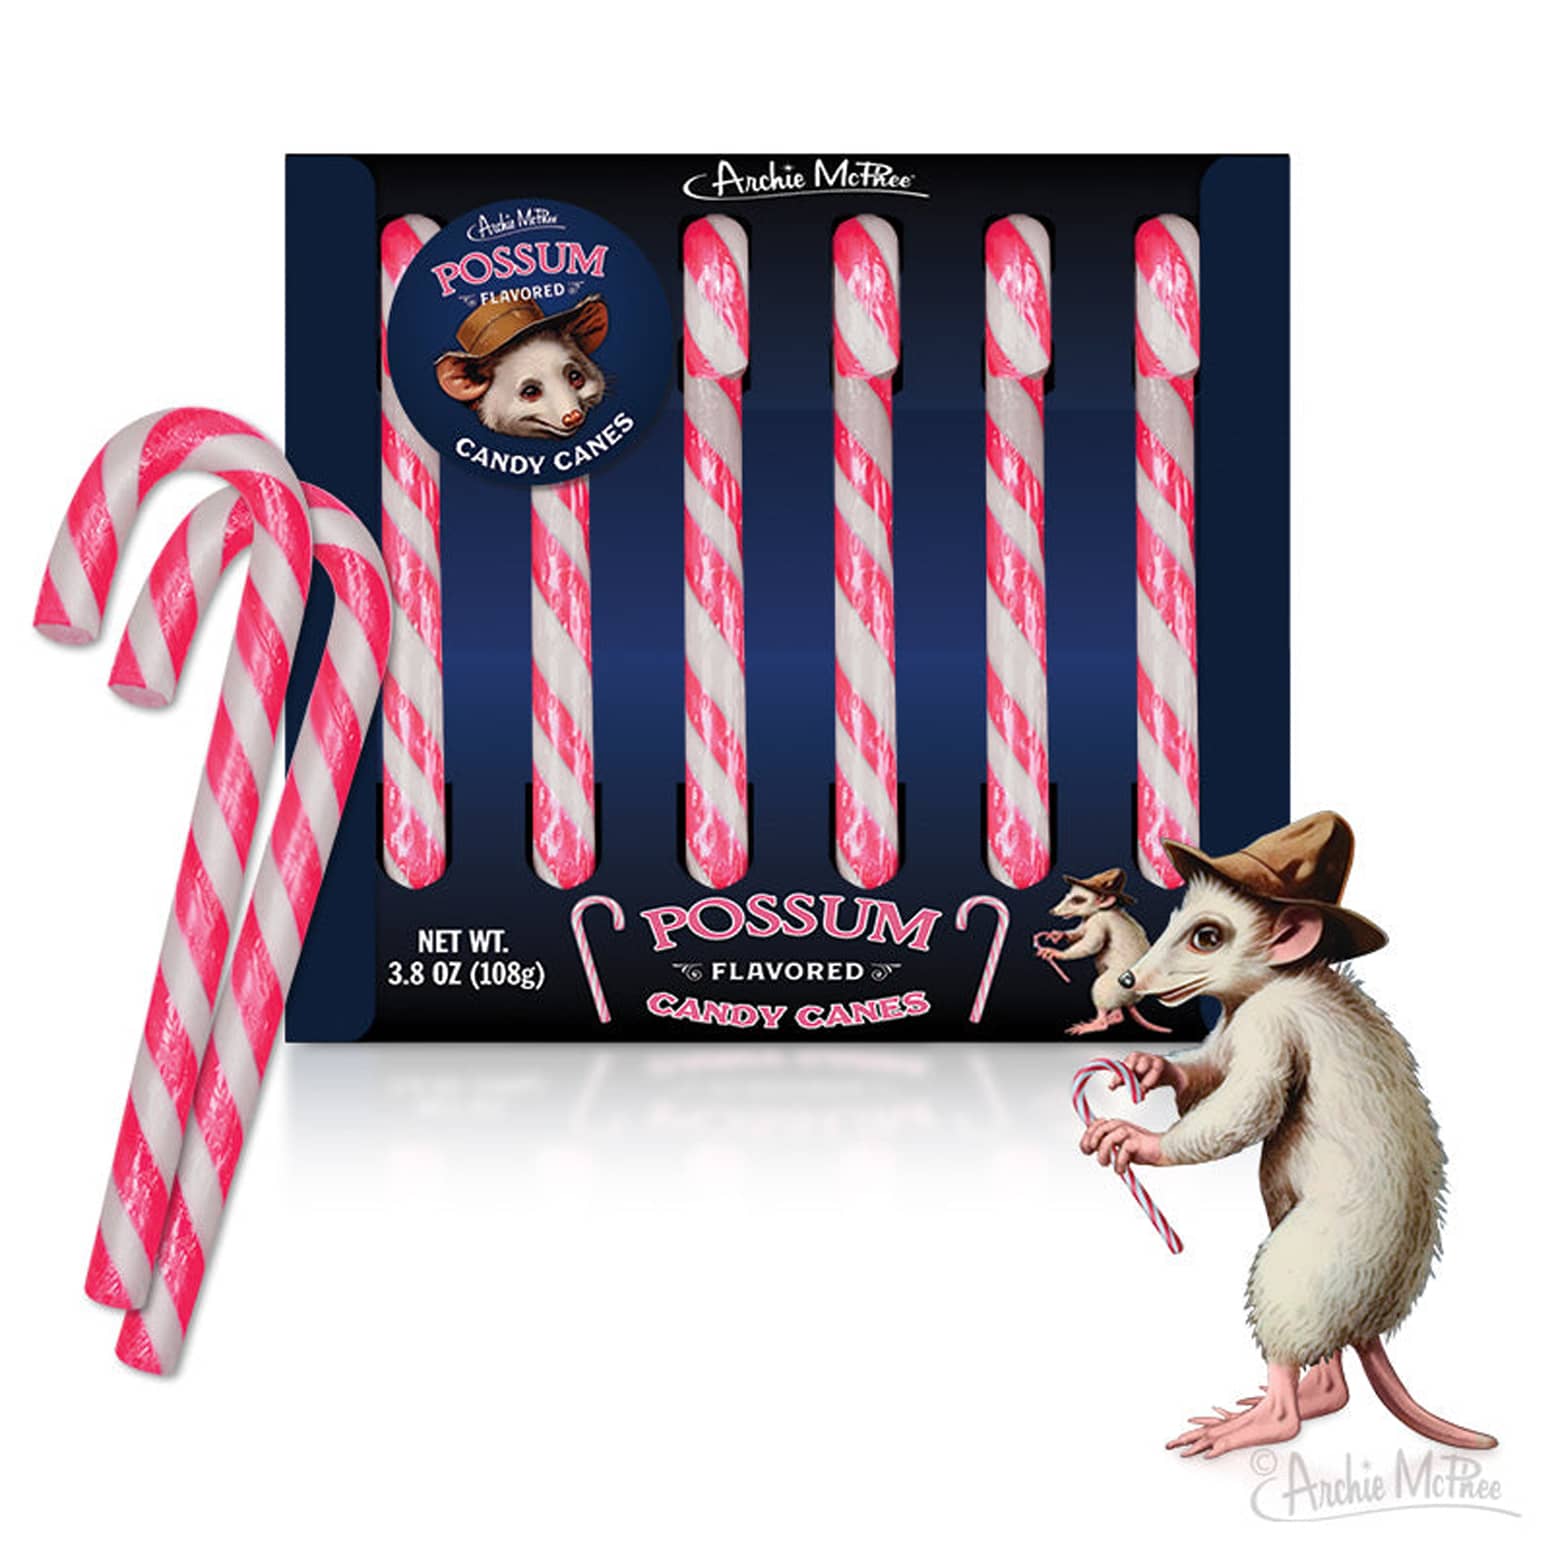 Possum-Flavored Candy Canes